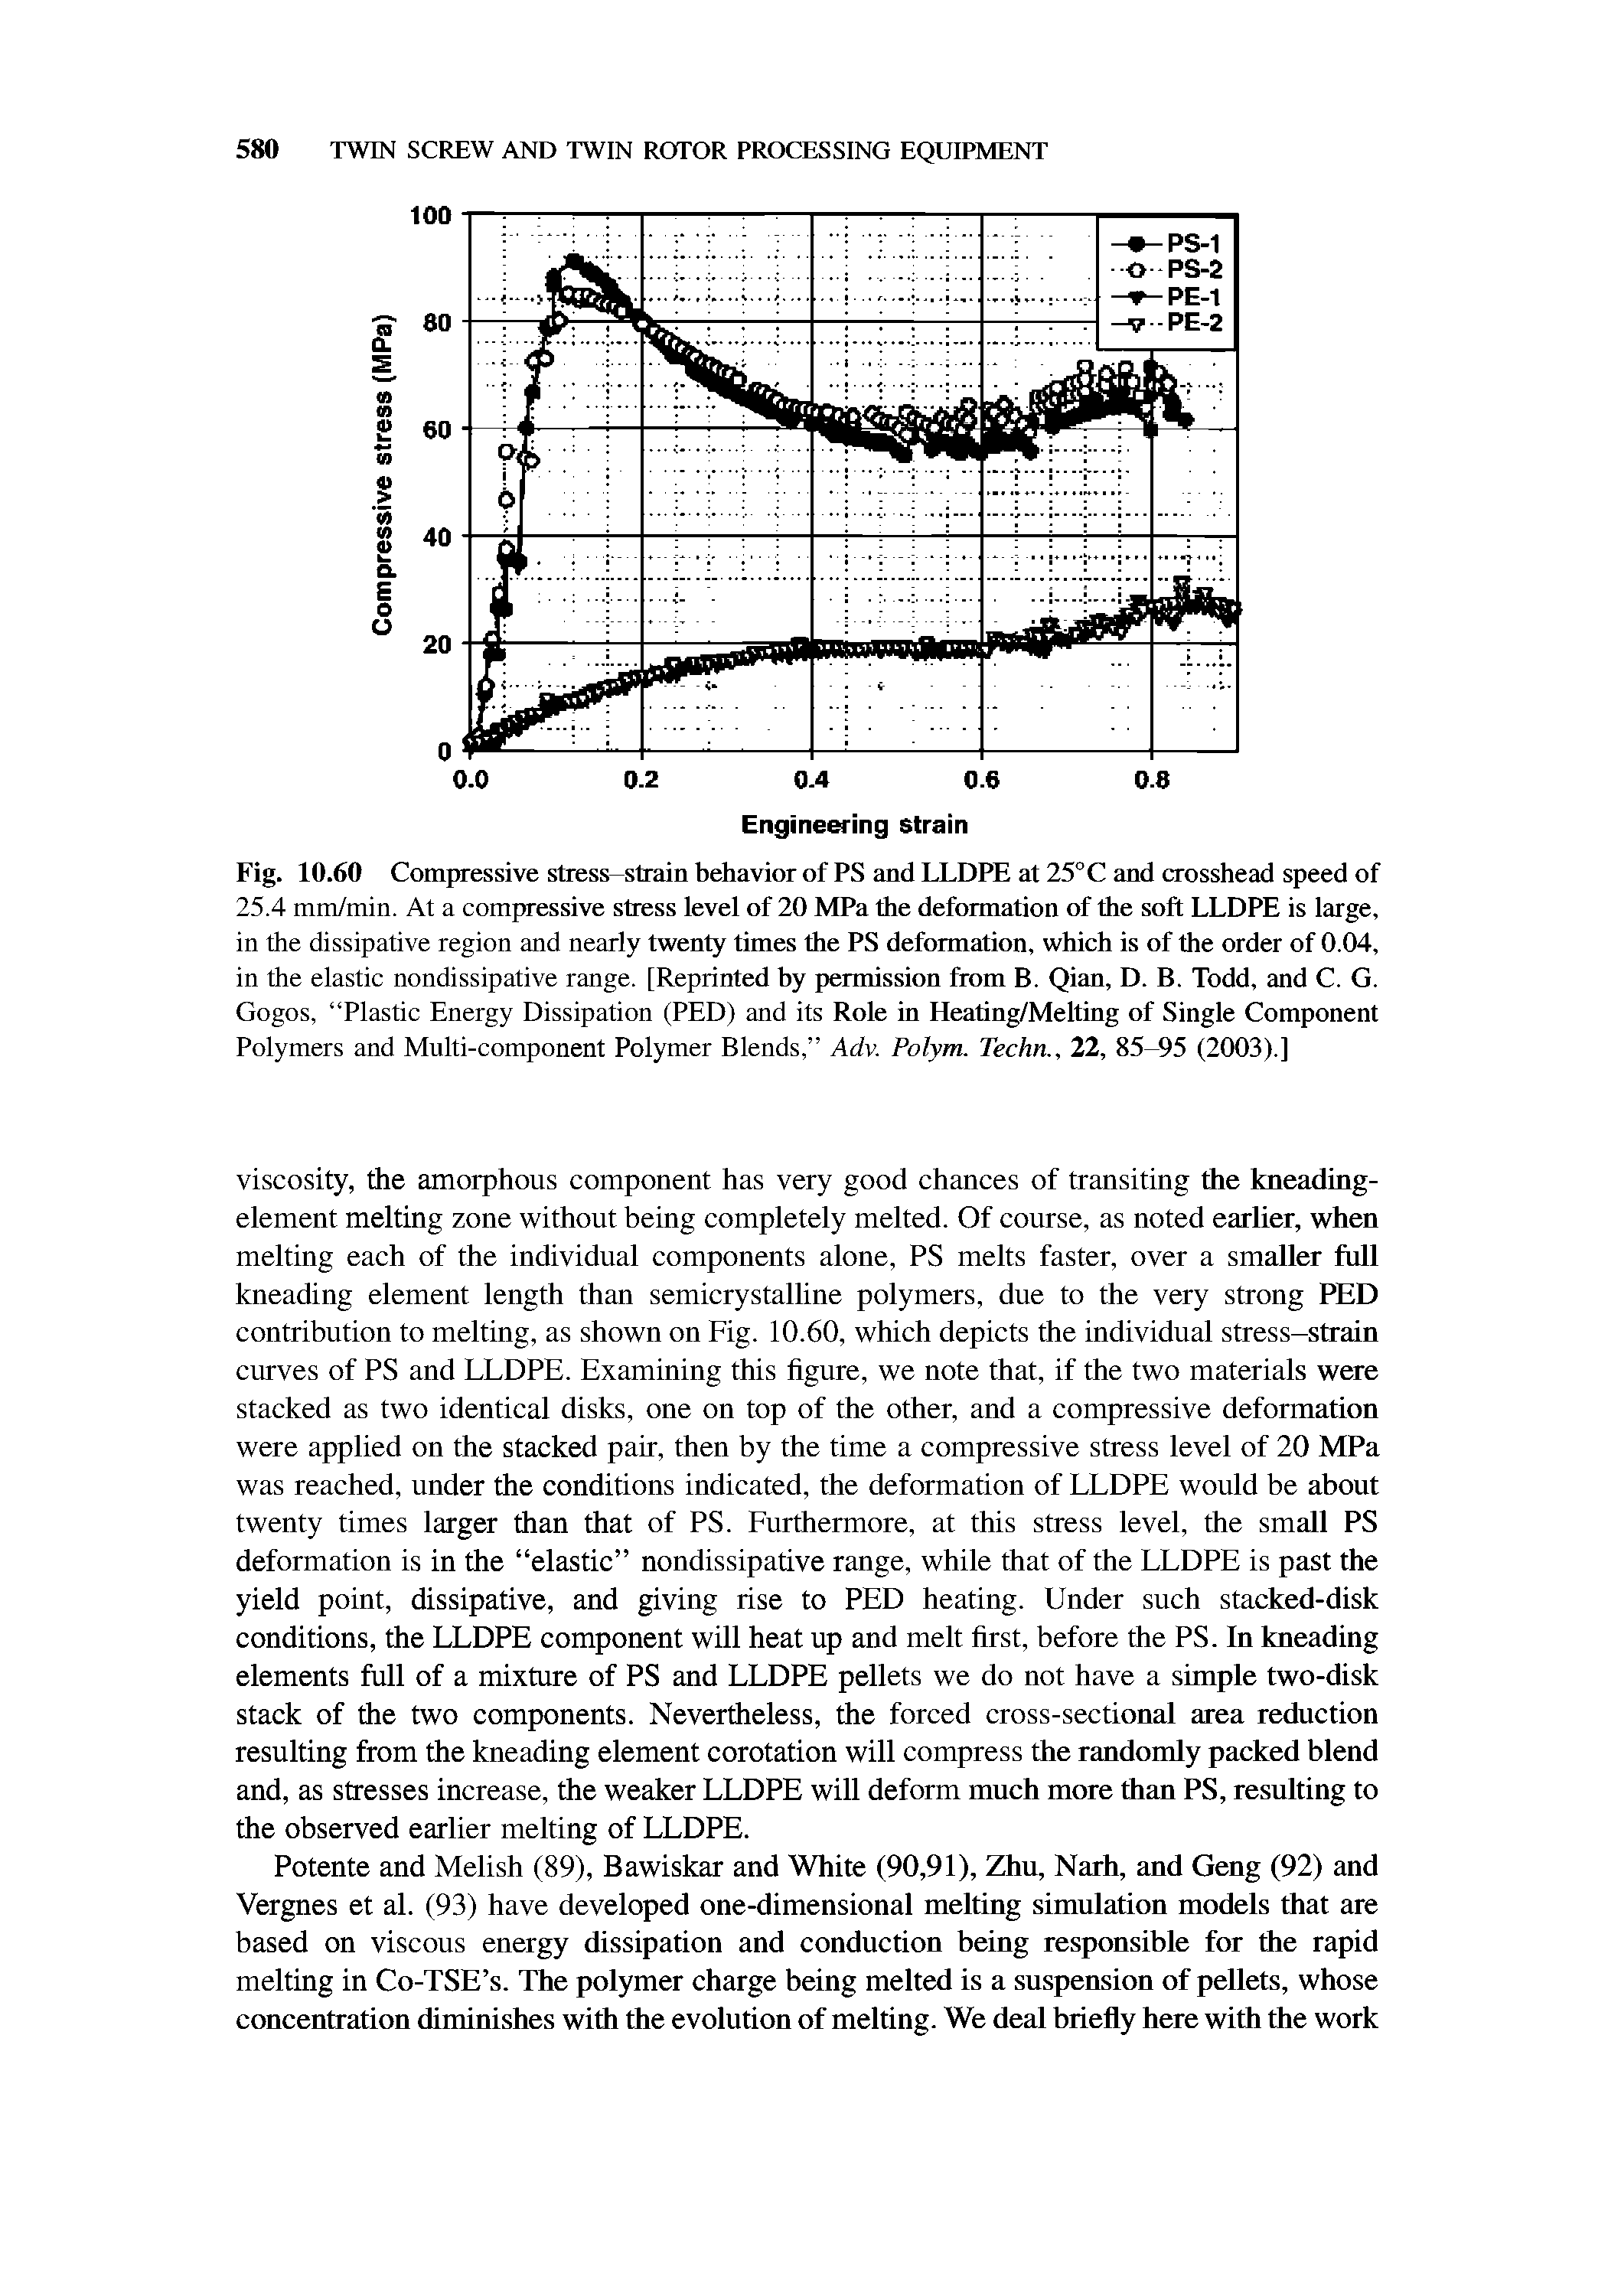 Fig. 10.60 Compressive stress-strain behavior of PS and LLDPE at 25°C and crosshead speed of 25.4 mm/min. At a compressive stress level of 20 MPa the deformation of the soft LLDPE is large, in the dissipative region and nearly twenty times the PS deformation, which is of the order of 0.04, in the elastic nondissipative range. [Reprinted by permission from B. Qian, D. B. Todd, and C. G. Gogos, Plastic Energy Dissipation (PED) and its Role in Heating/Melting of Single Component Polymers and Multi-component Polymer Blends, Adv. Polym. Techn., 22, 85-95 (2003).]...